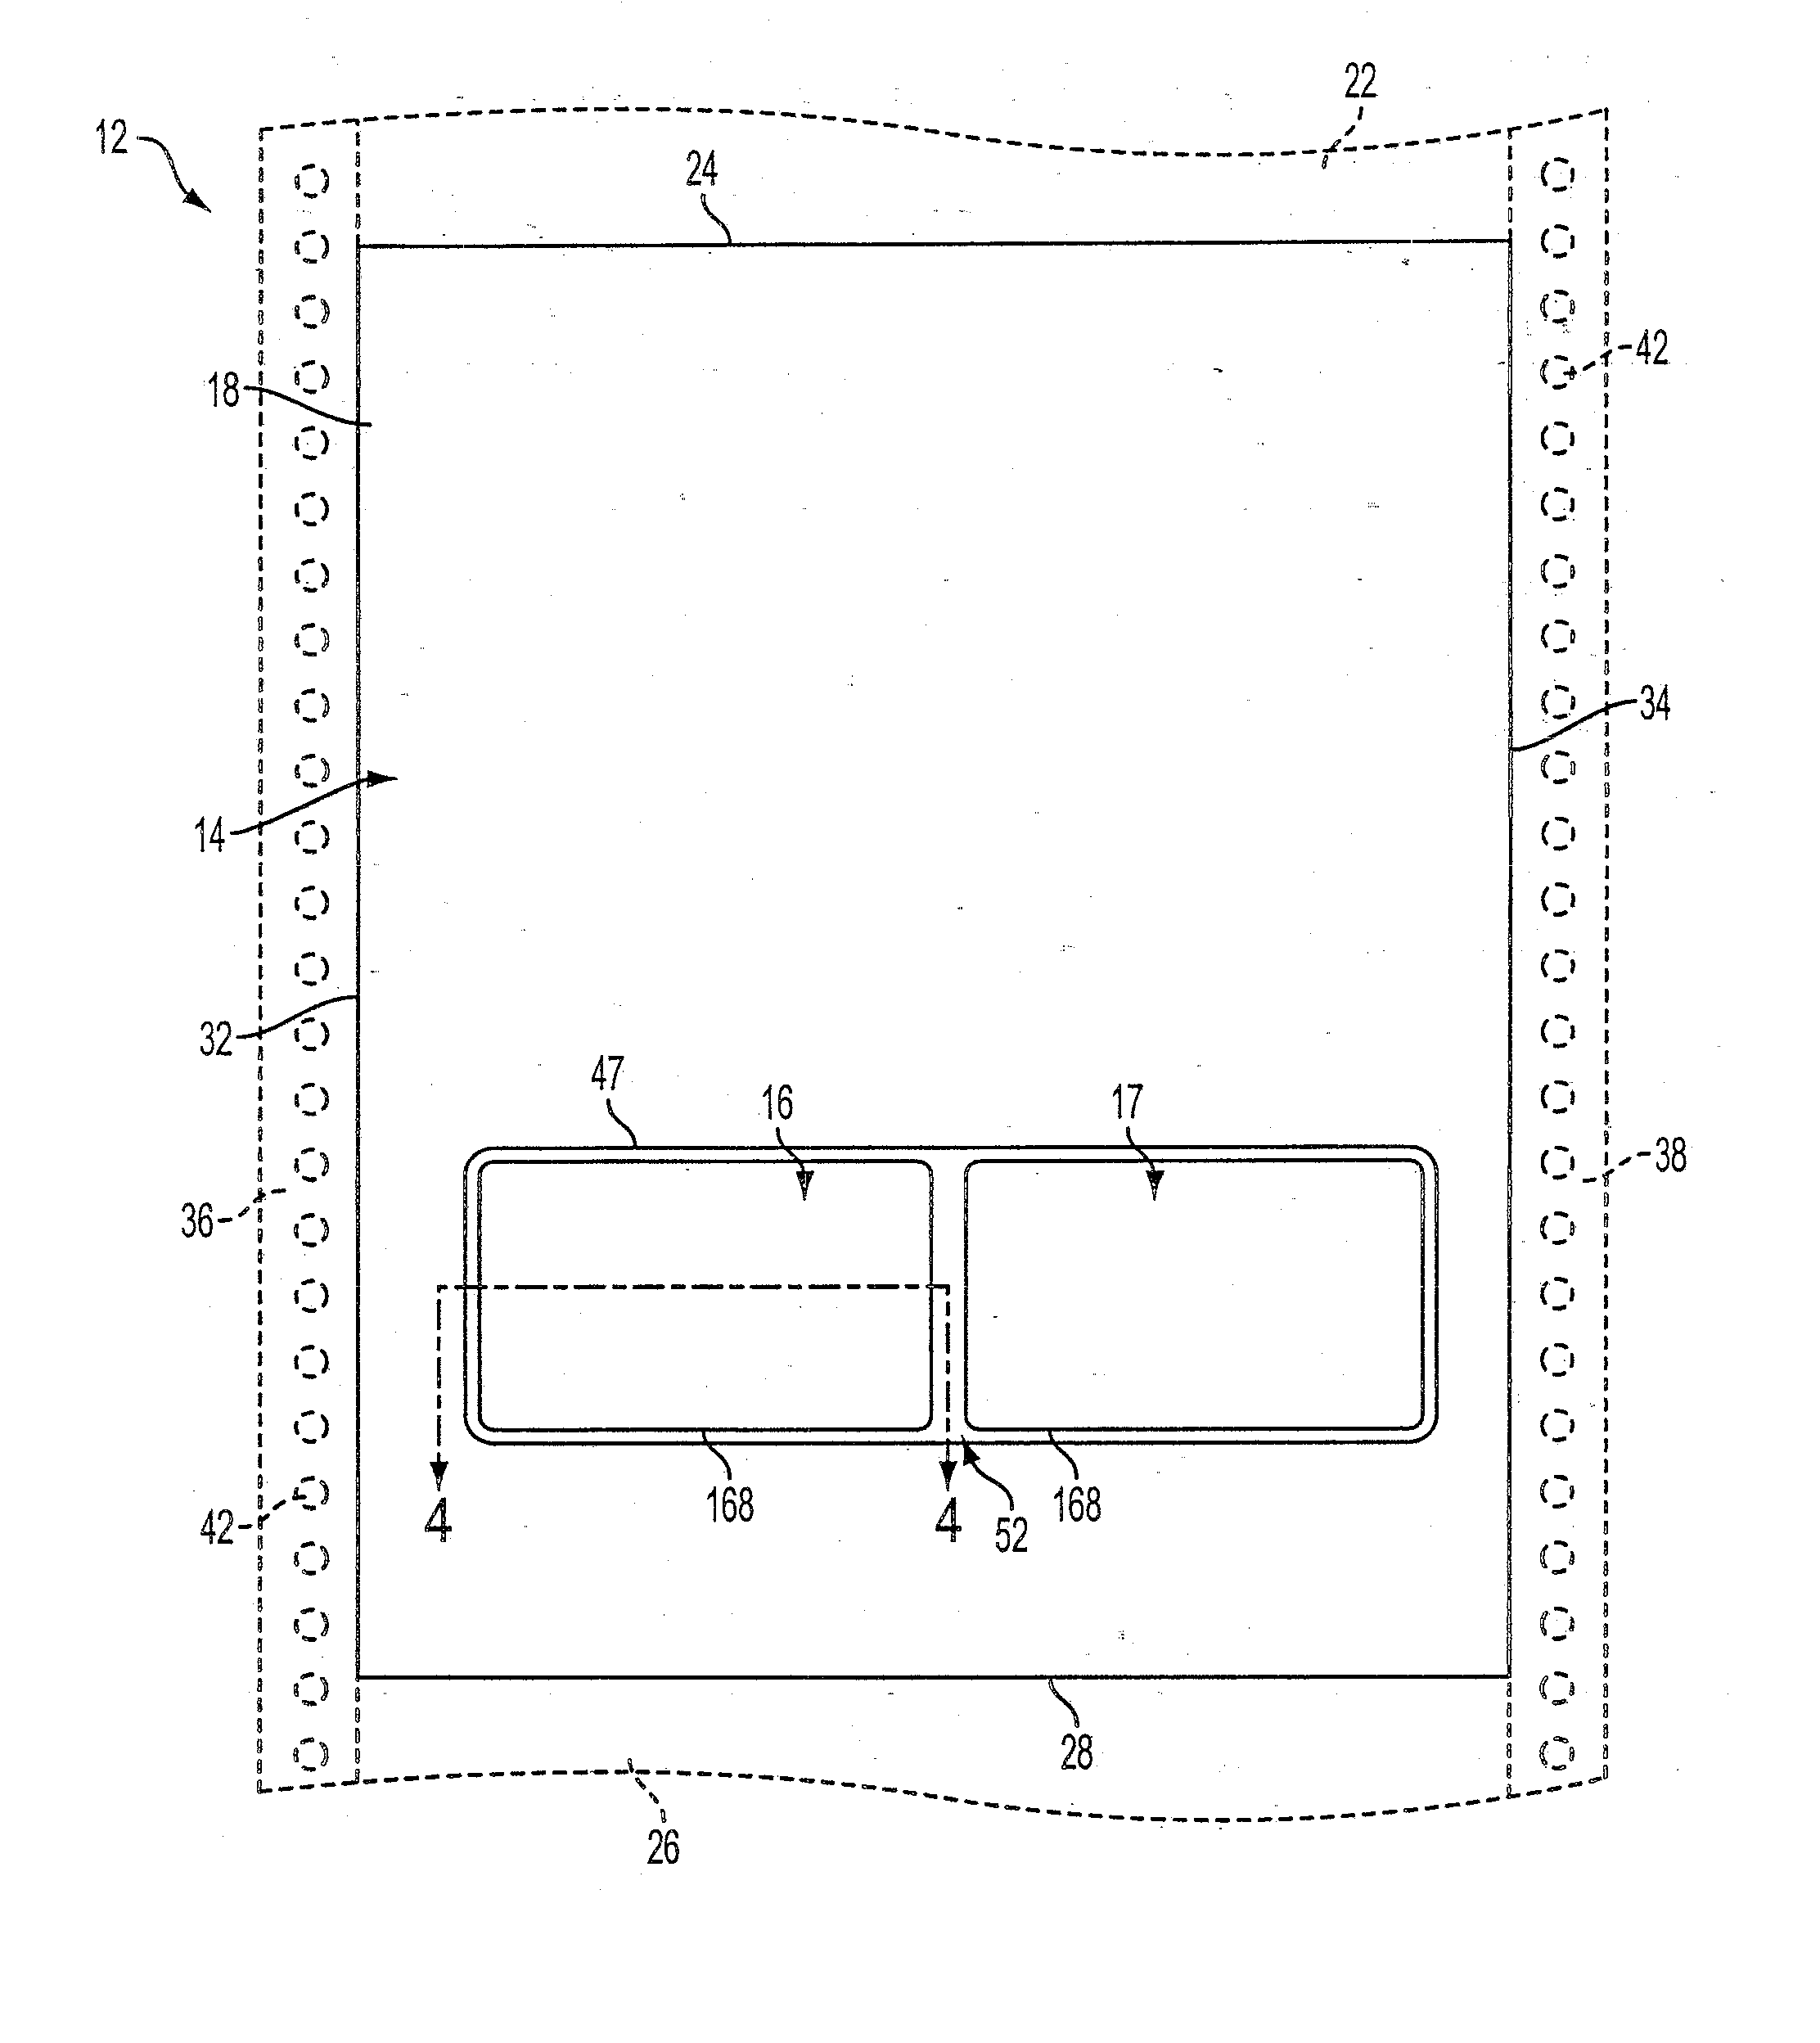 Document Sheet With Recessed Cavity and Window Two-Sided Printing of an Object Received Therein